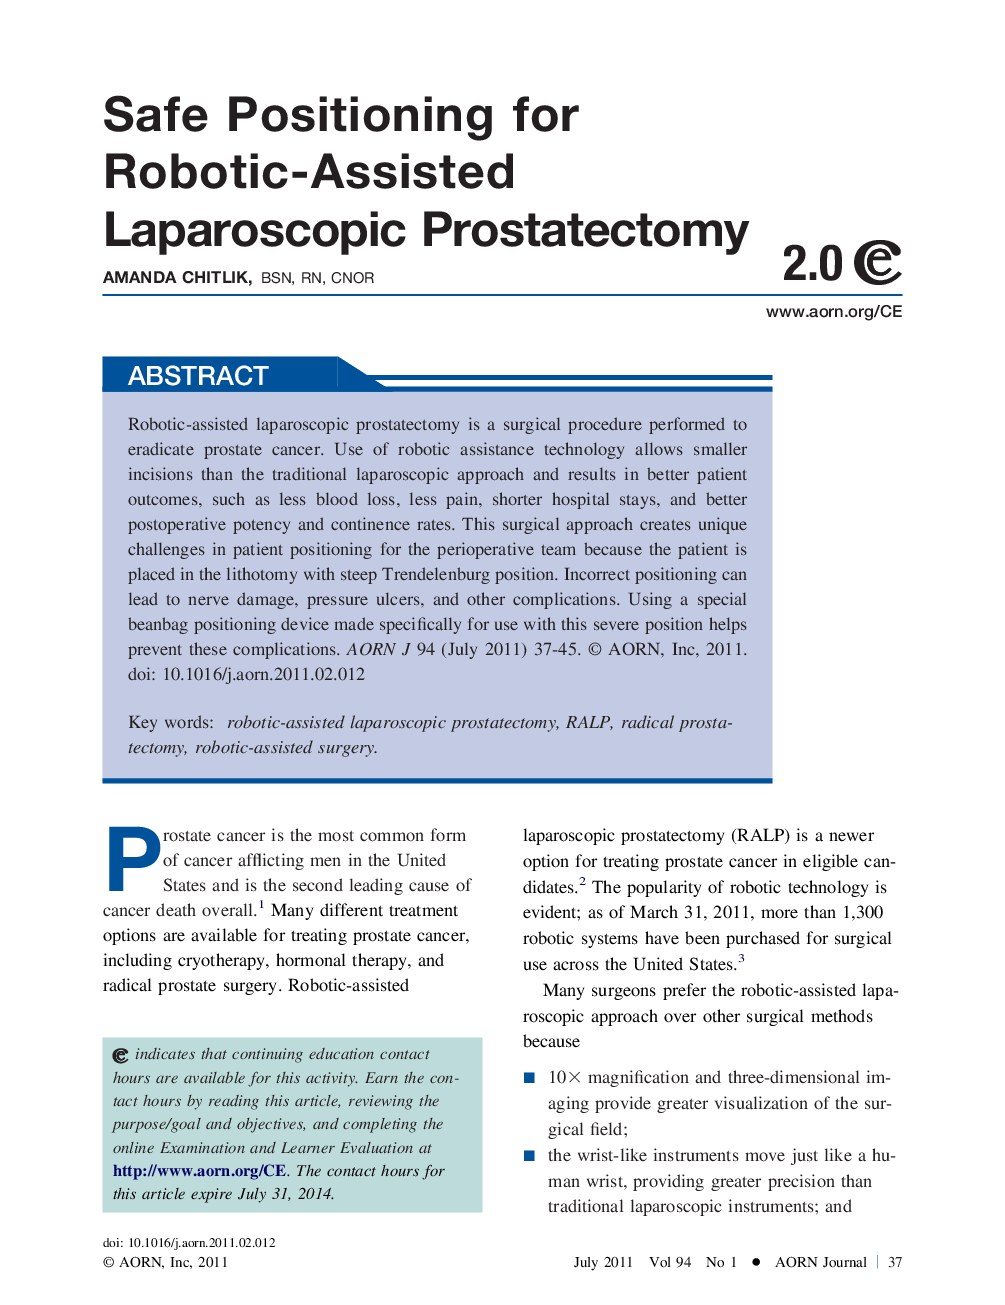 Safe Positioning for Robotic-Assisted Laparoscopic Prostatectomy